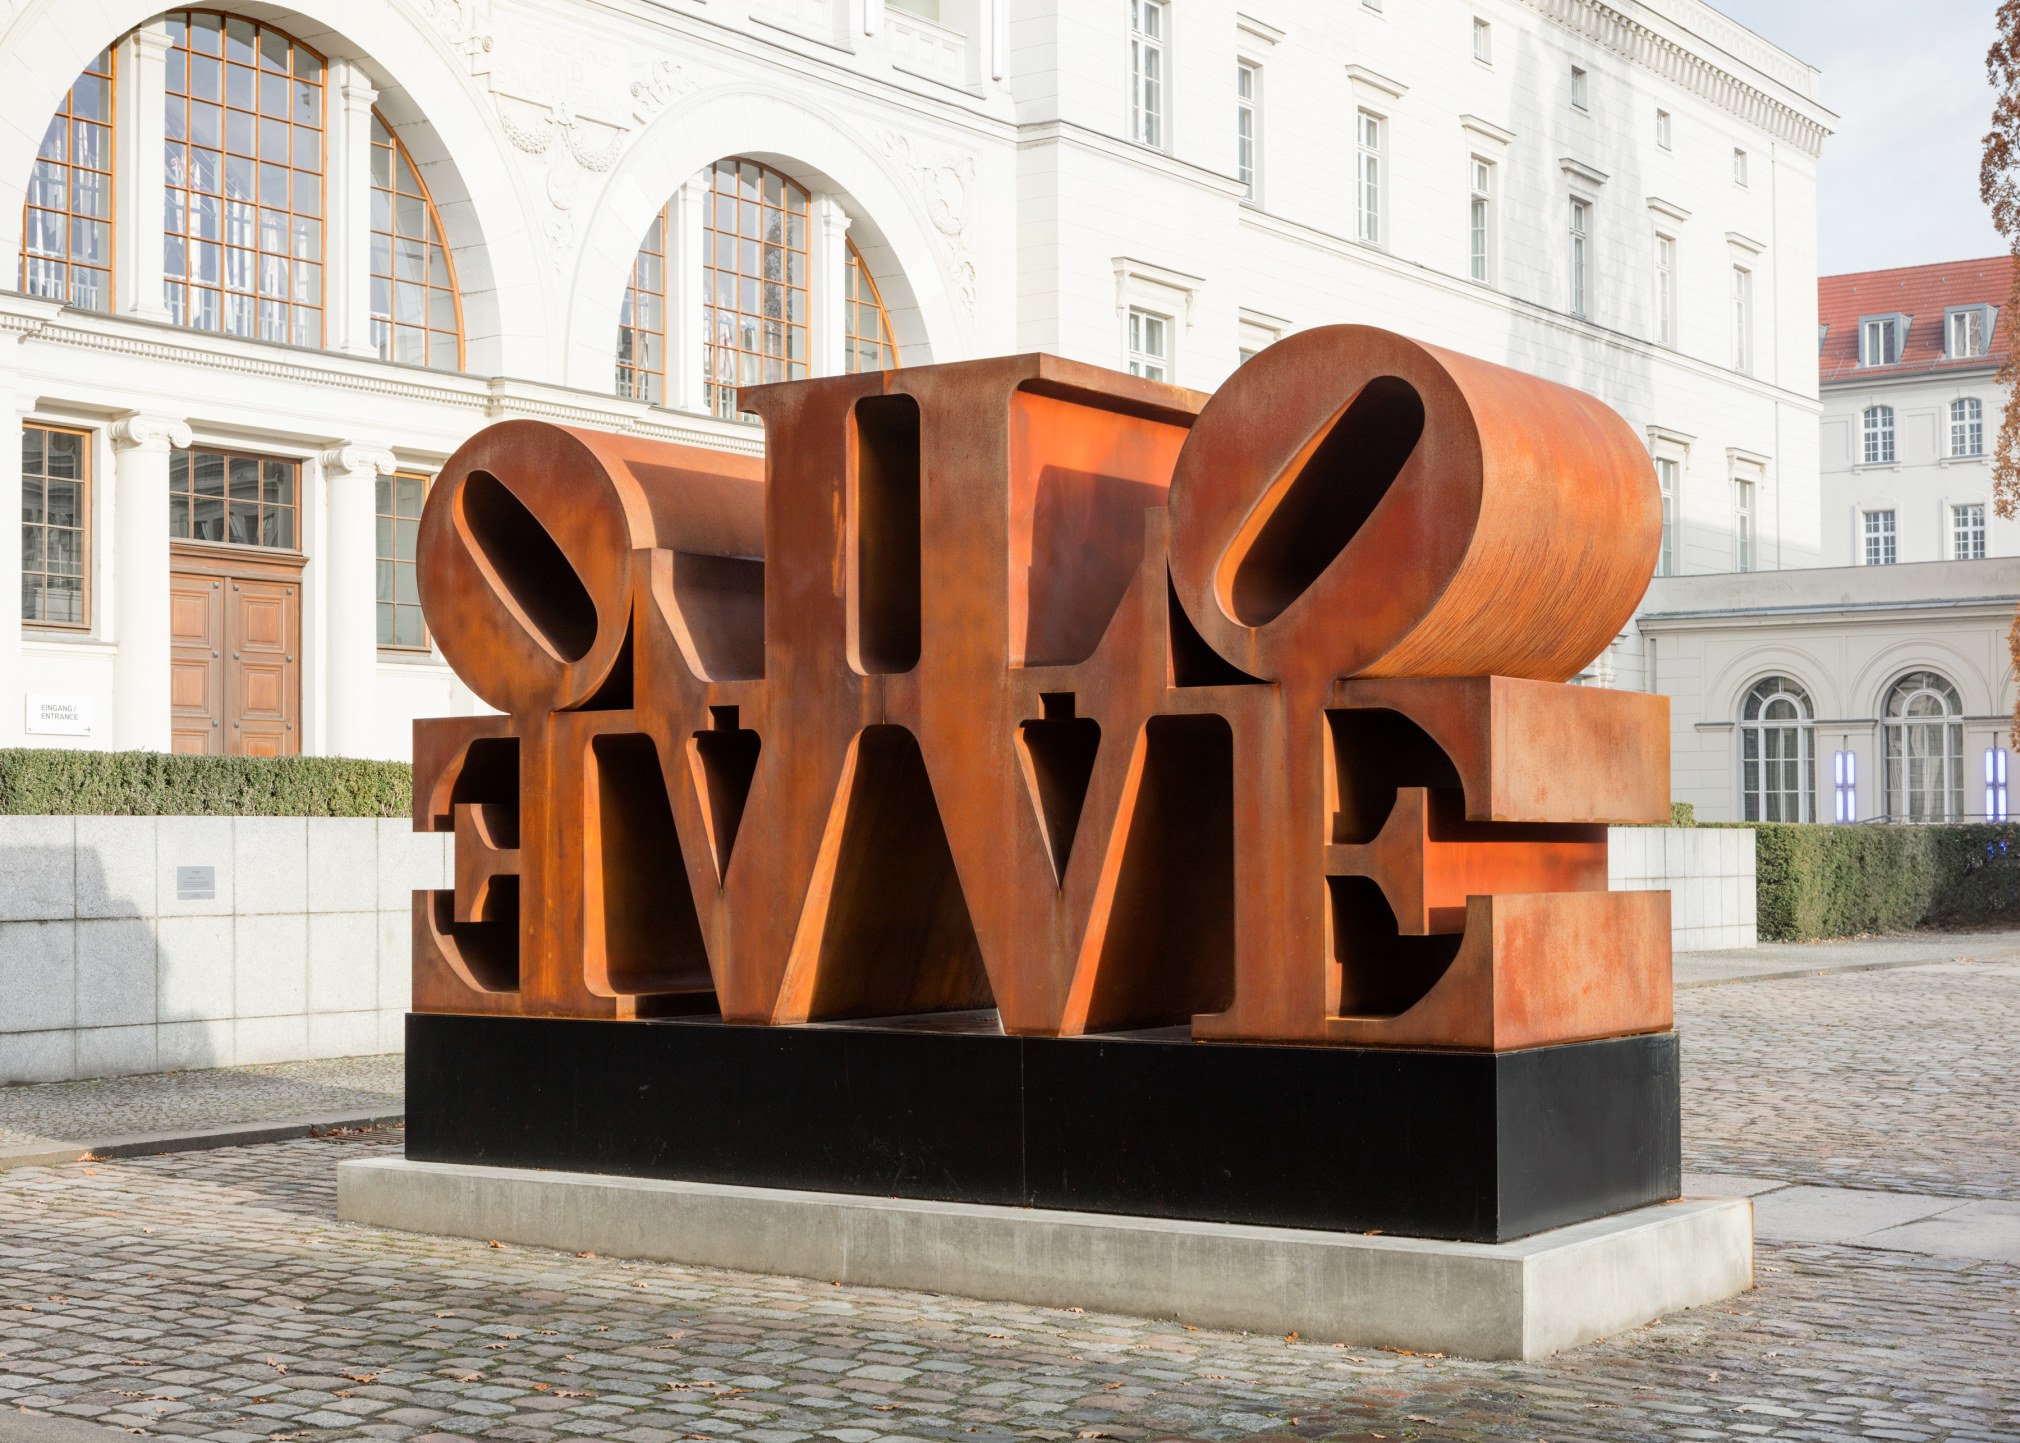 Imperial LOVE, a 96 by 192 by 60 inch Cor-Ten steel sculpture consisting of two quadripartite LOVE sculptures side by side, with the L and V of each sculpture back to back and the O and E facing outwards.